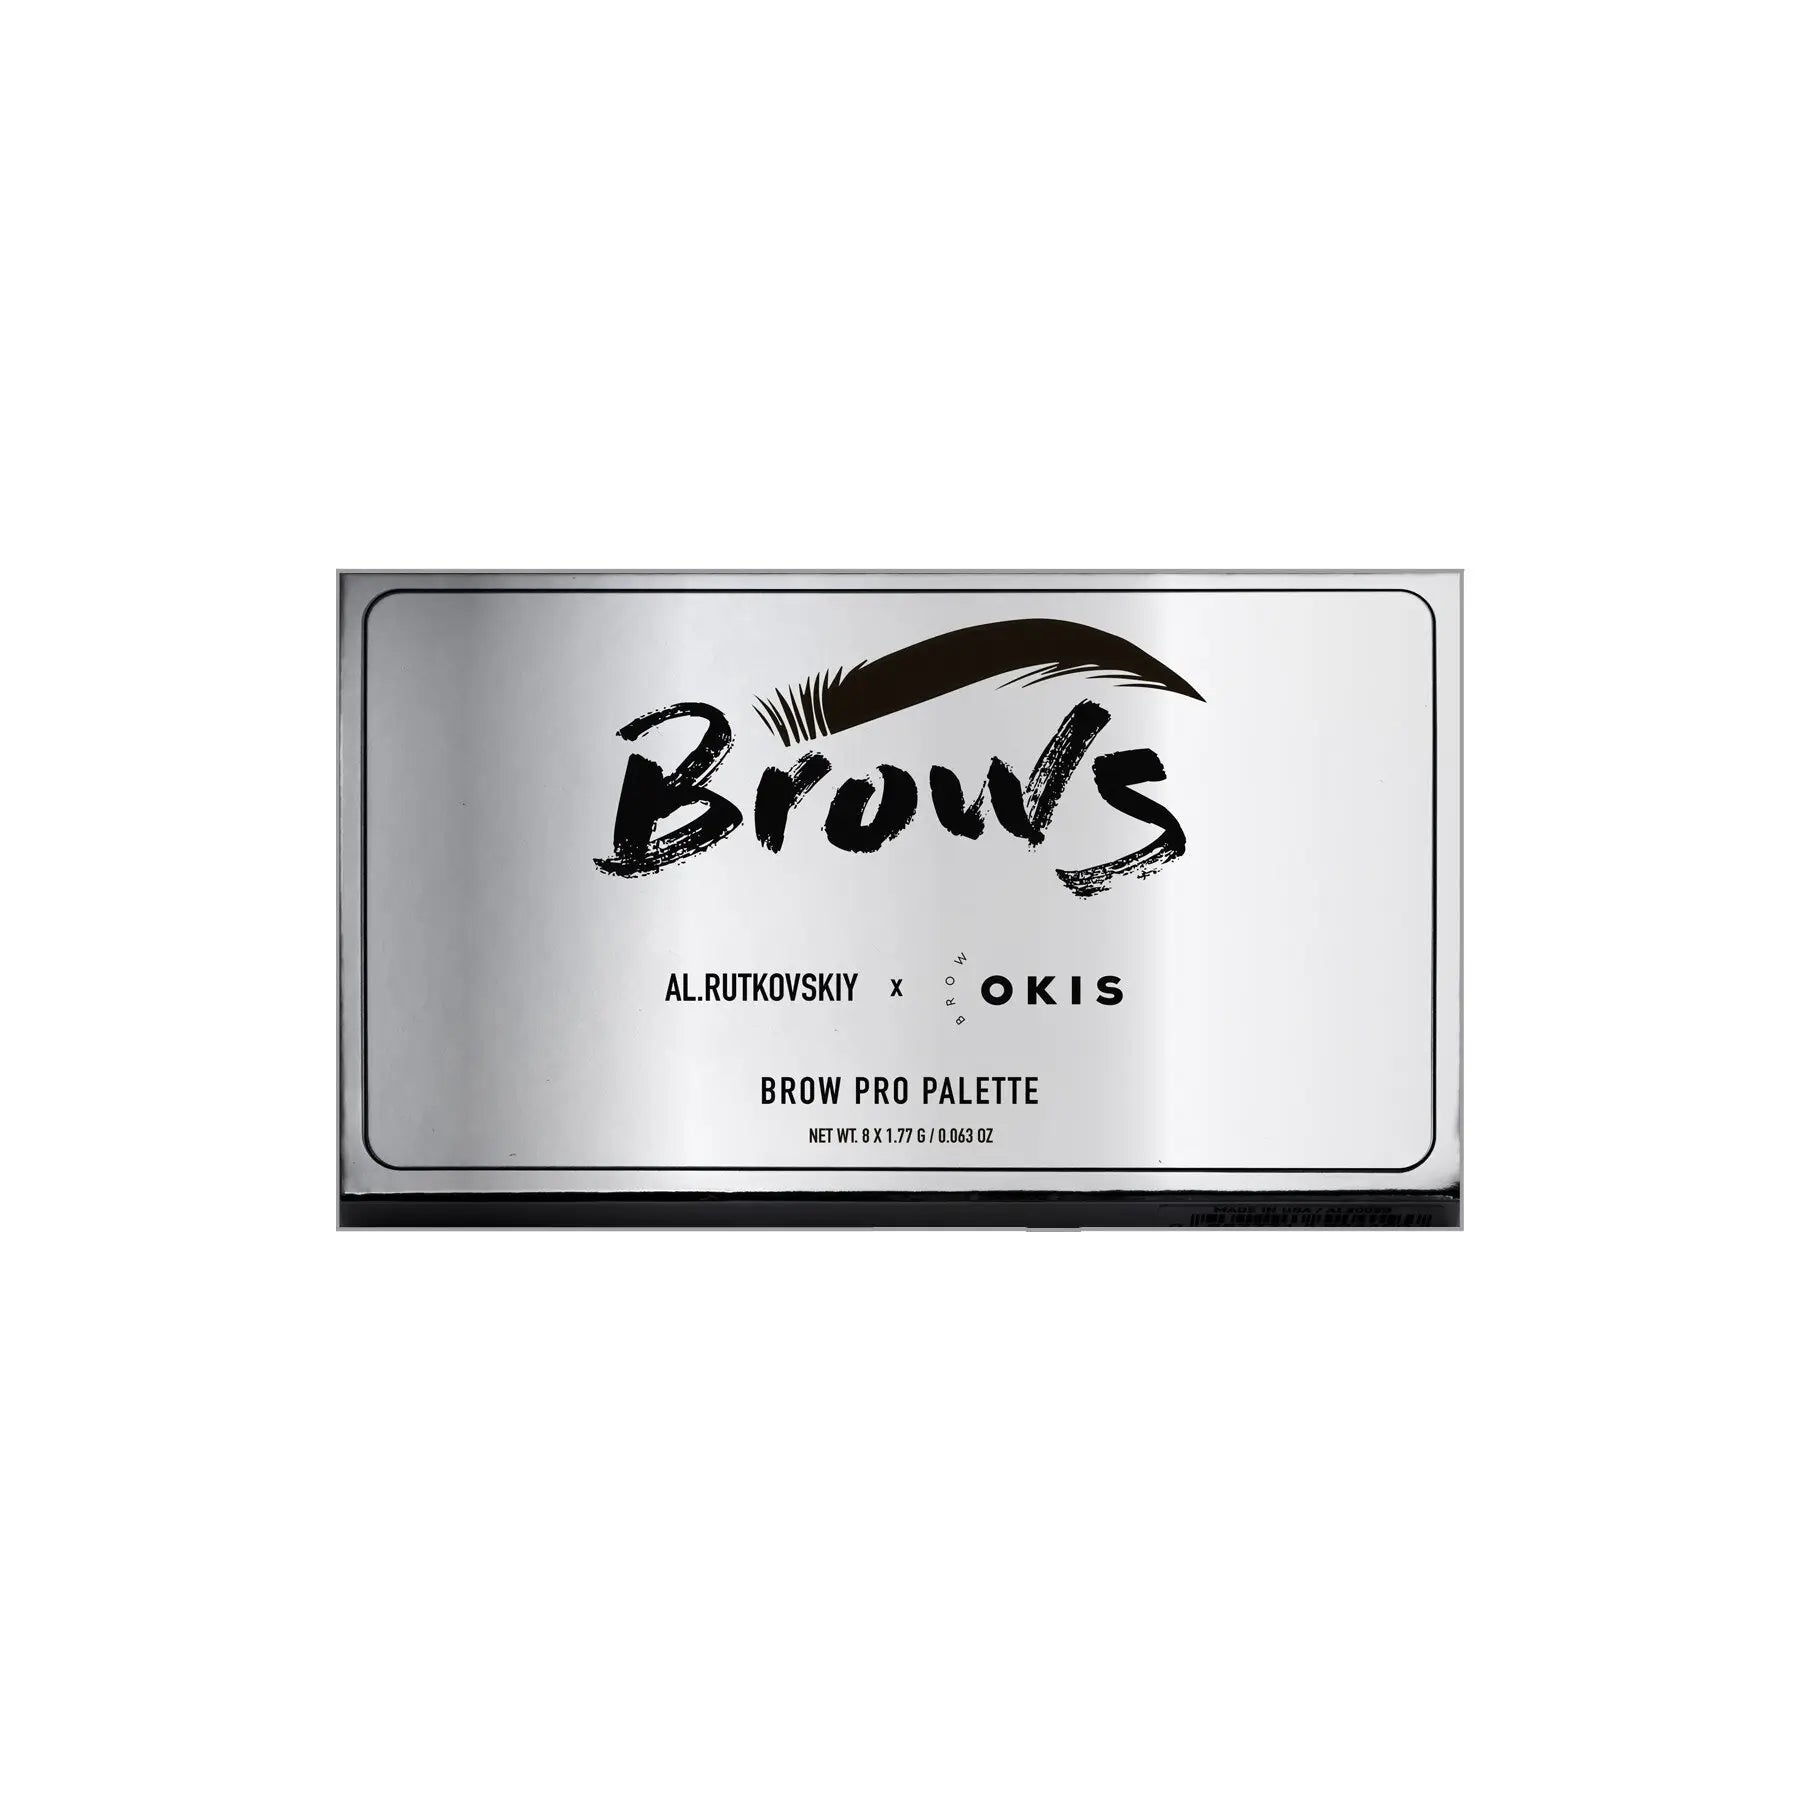 Eyebrow palette limited edition